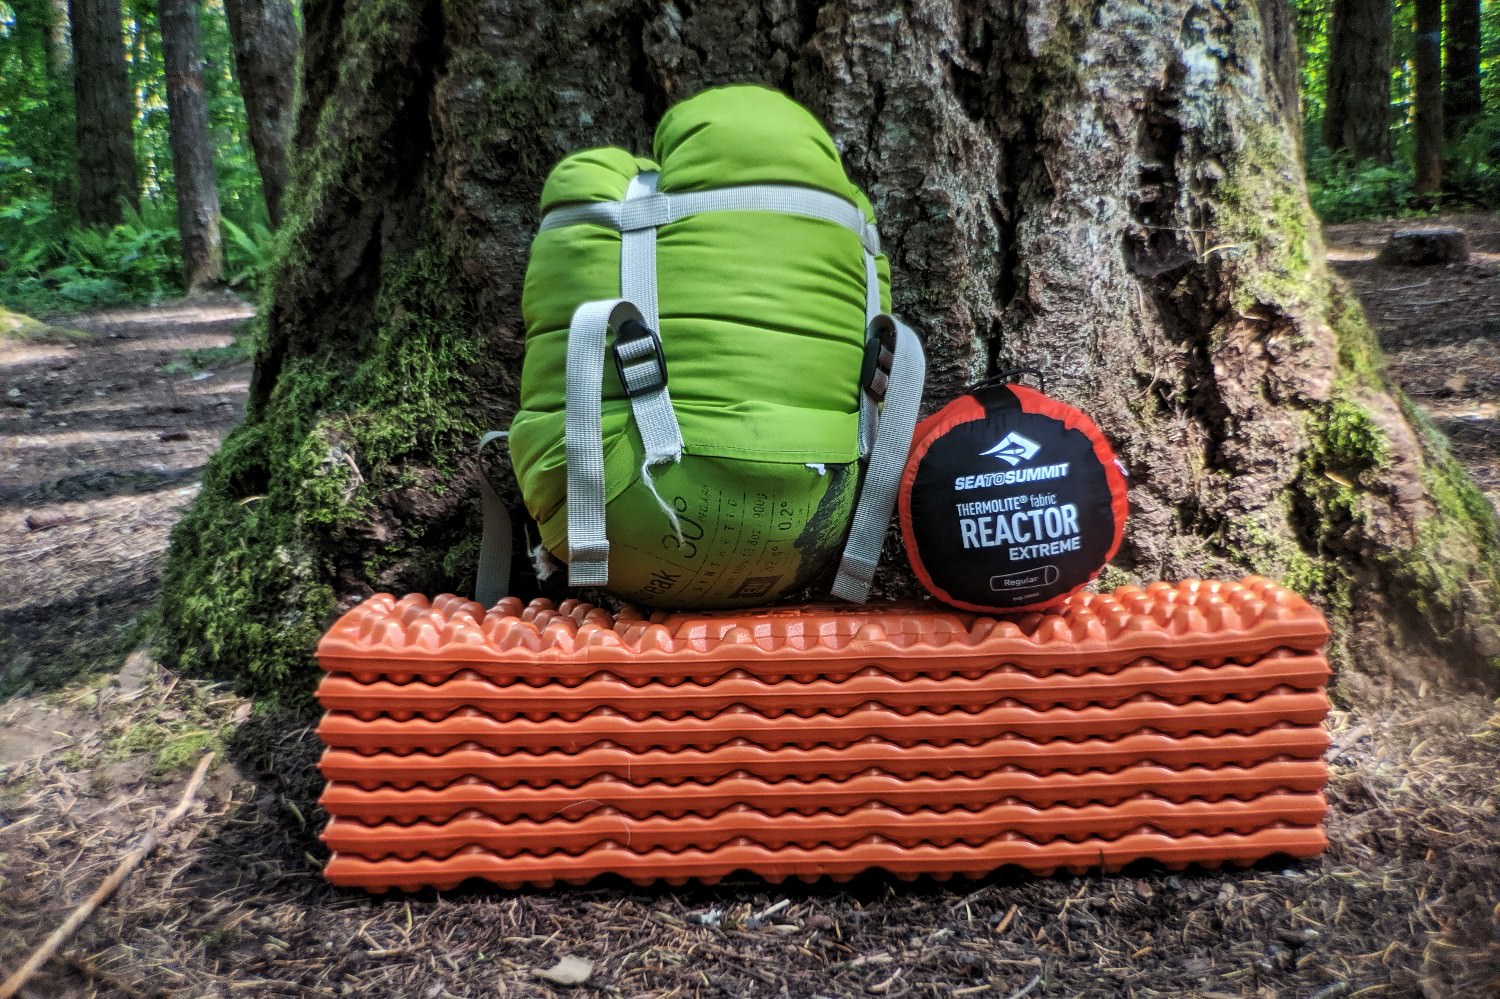 The Reactor Extreme liner can add significant warmth to your sleeping bag on cold nights.